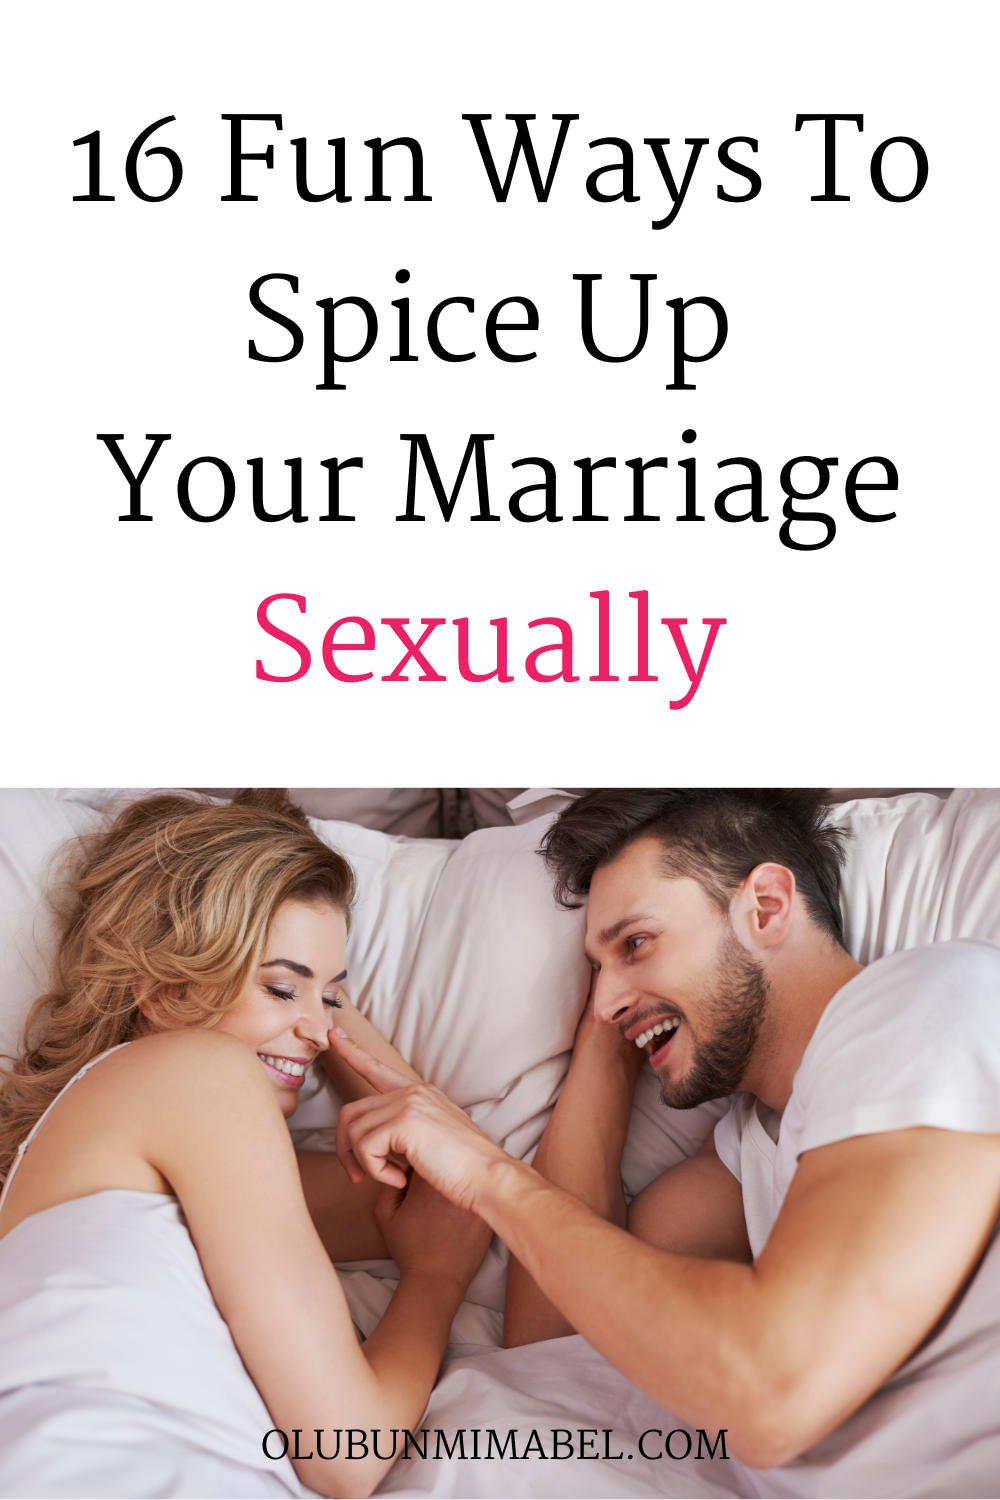 How To Spice Up Your Marriage